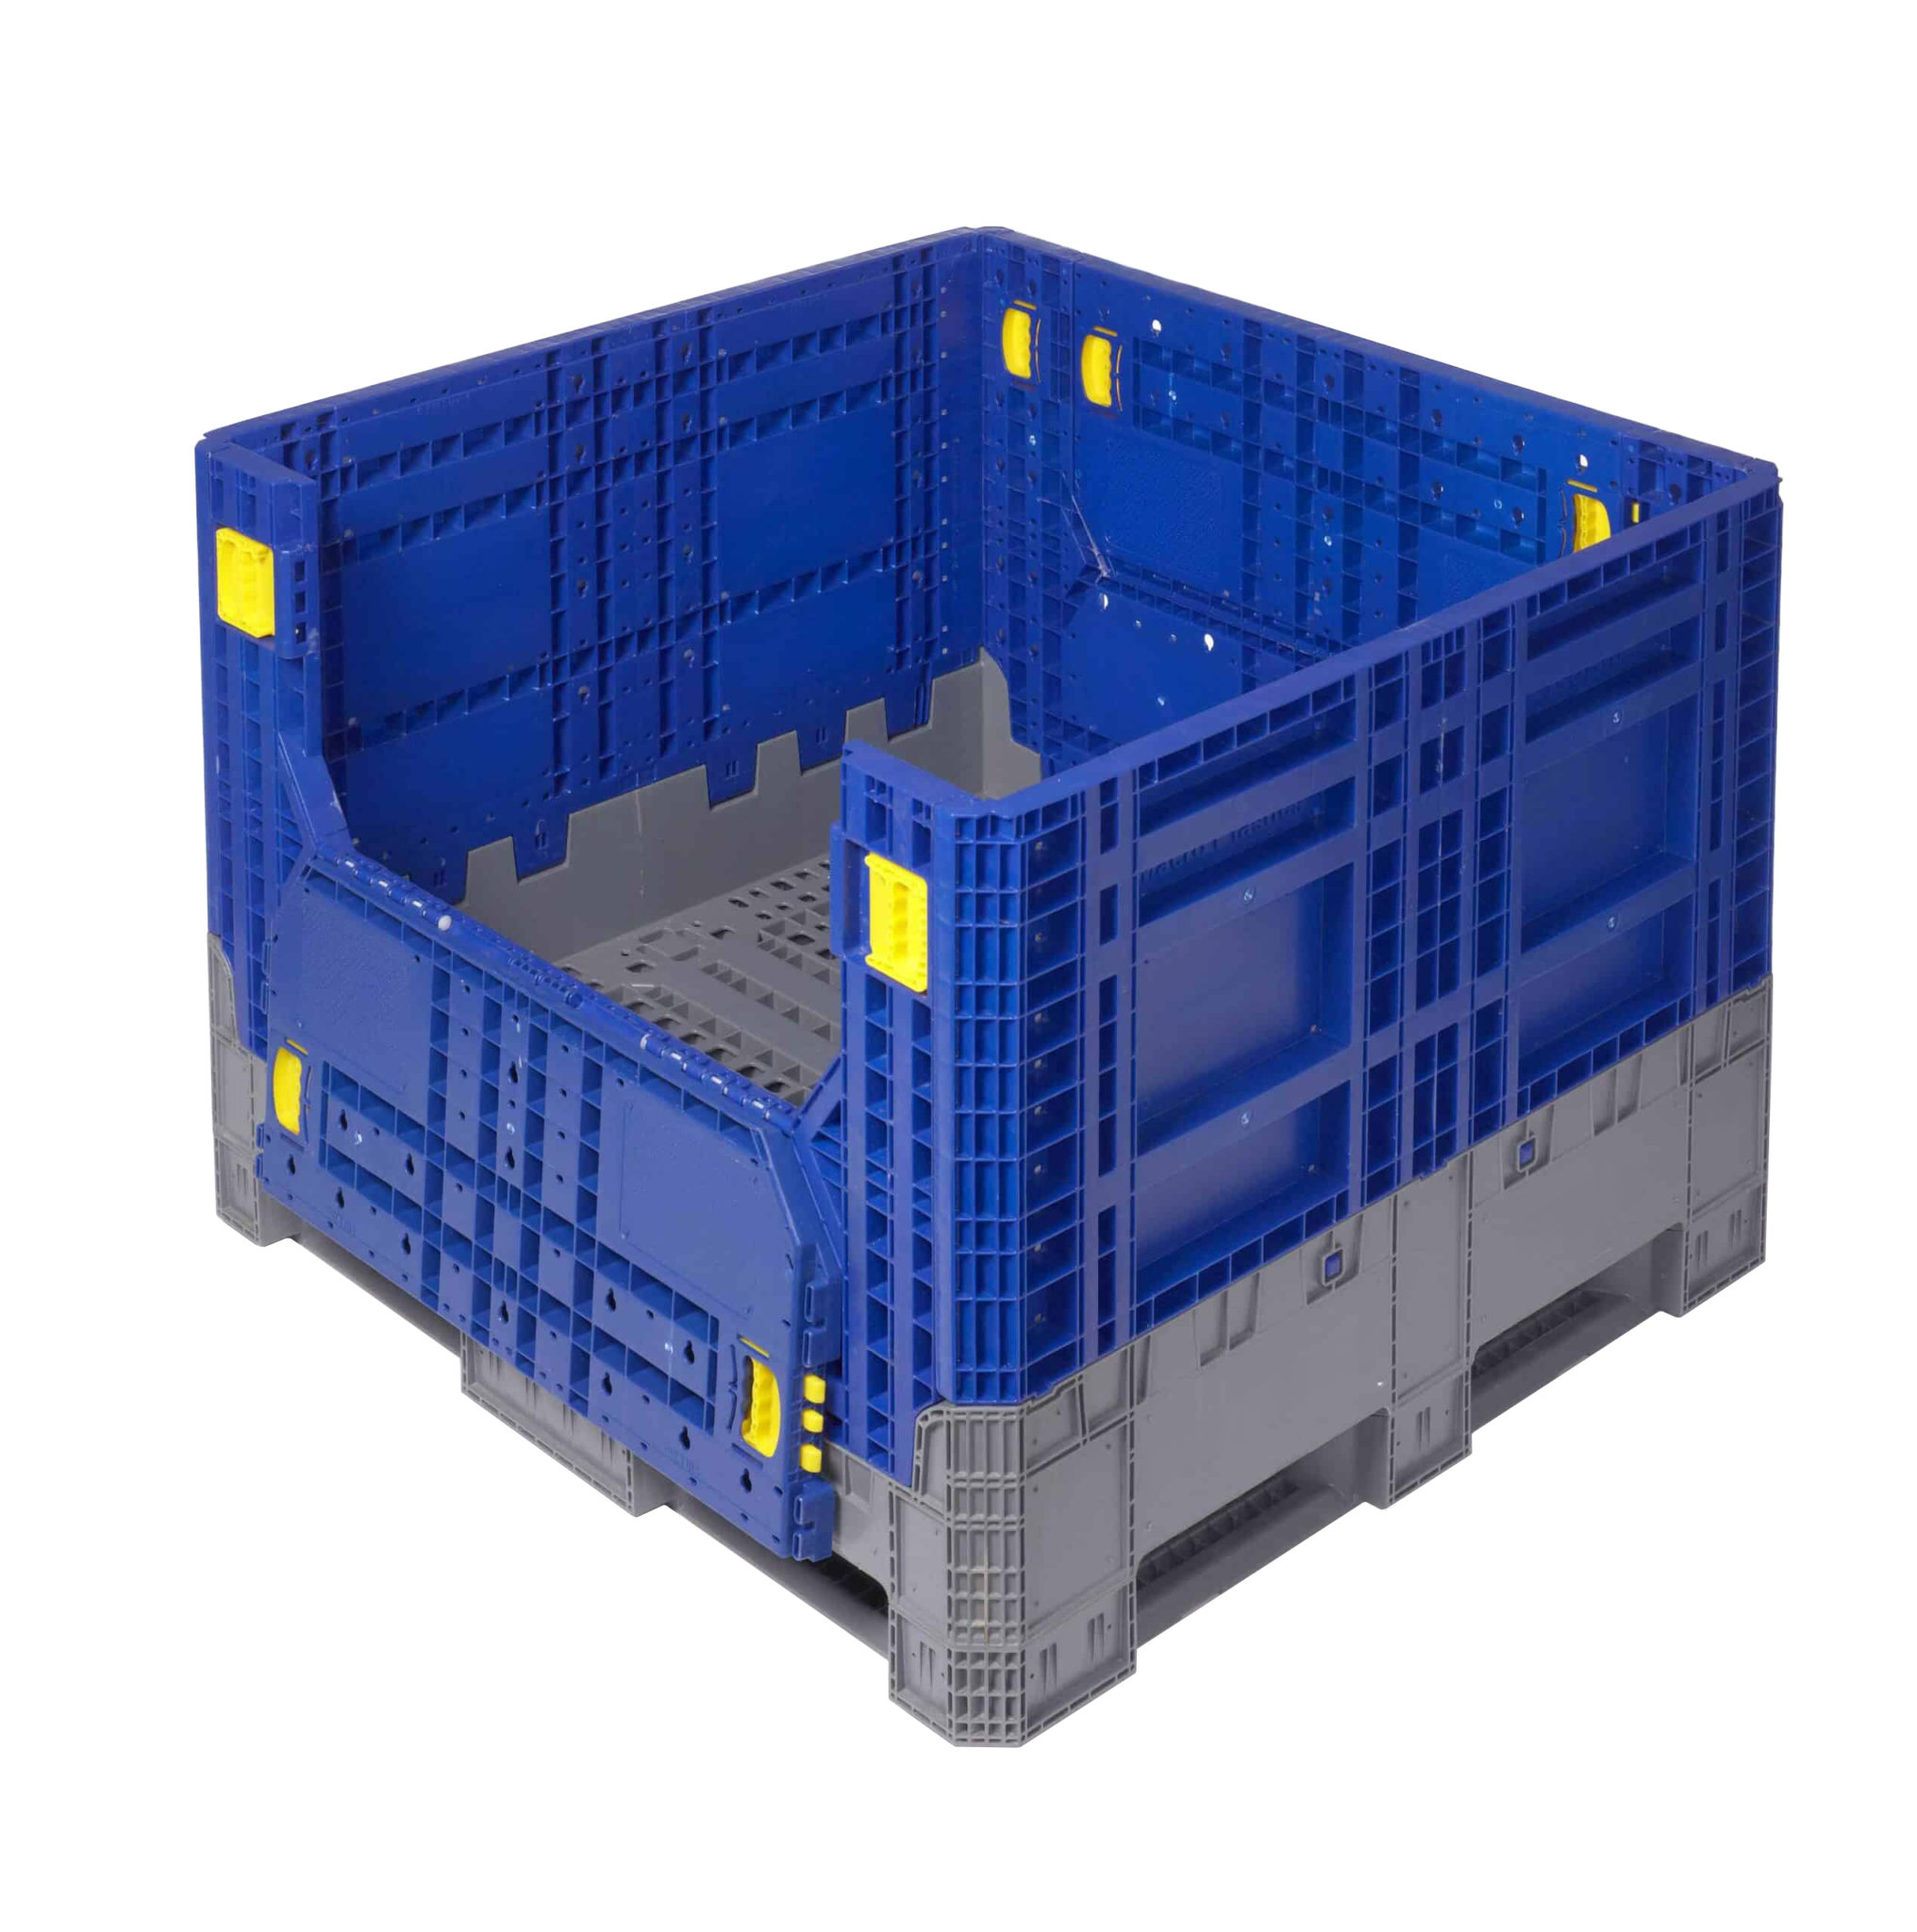 47 x 45 x 30 – Collapsible Bulk Container With Drop Doors